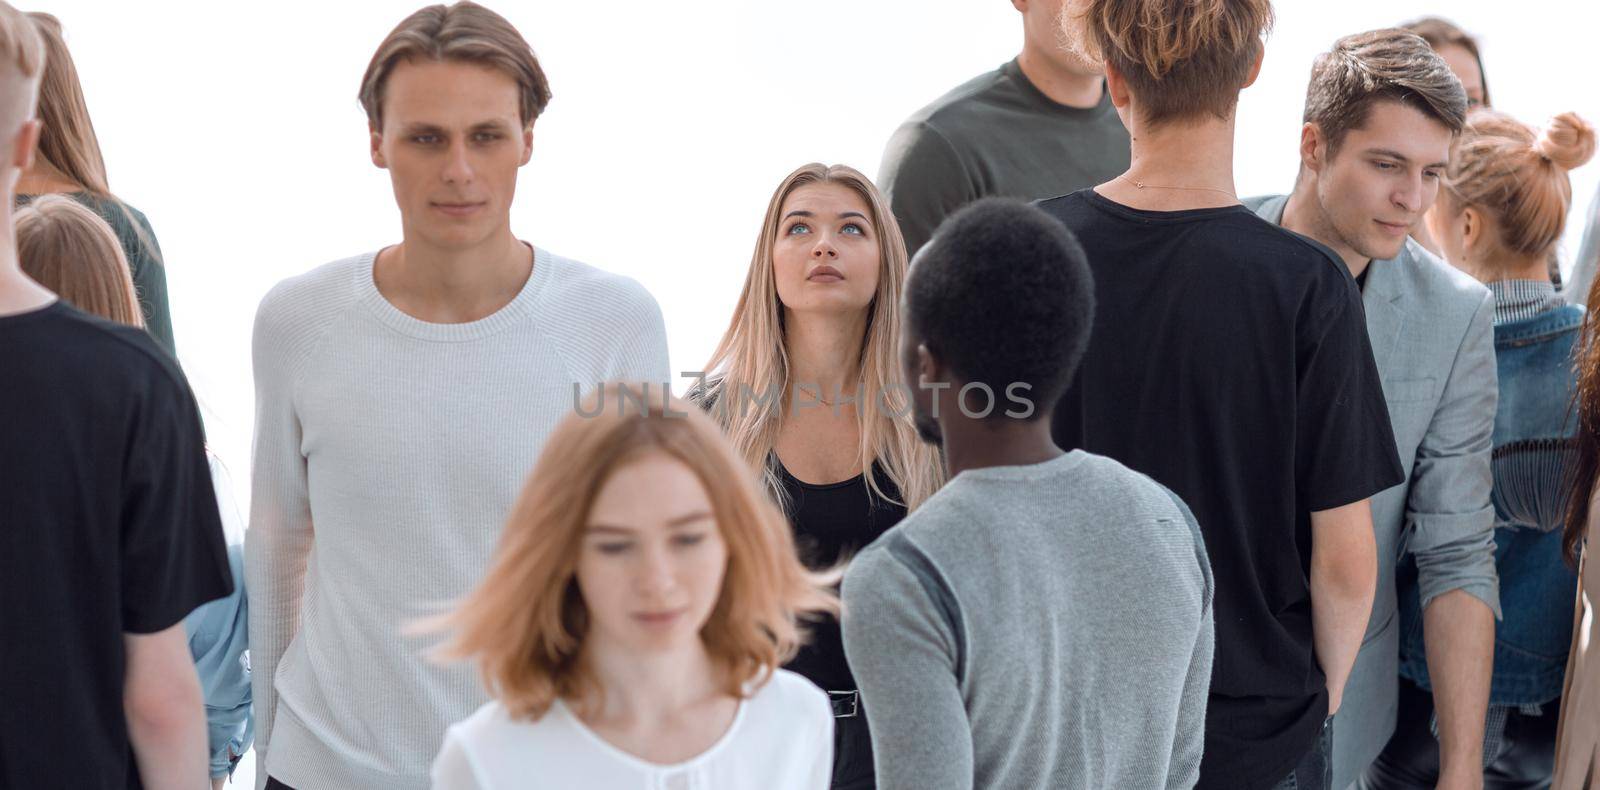 image of a serious woman standing in front of a casual group of young people.